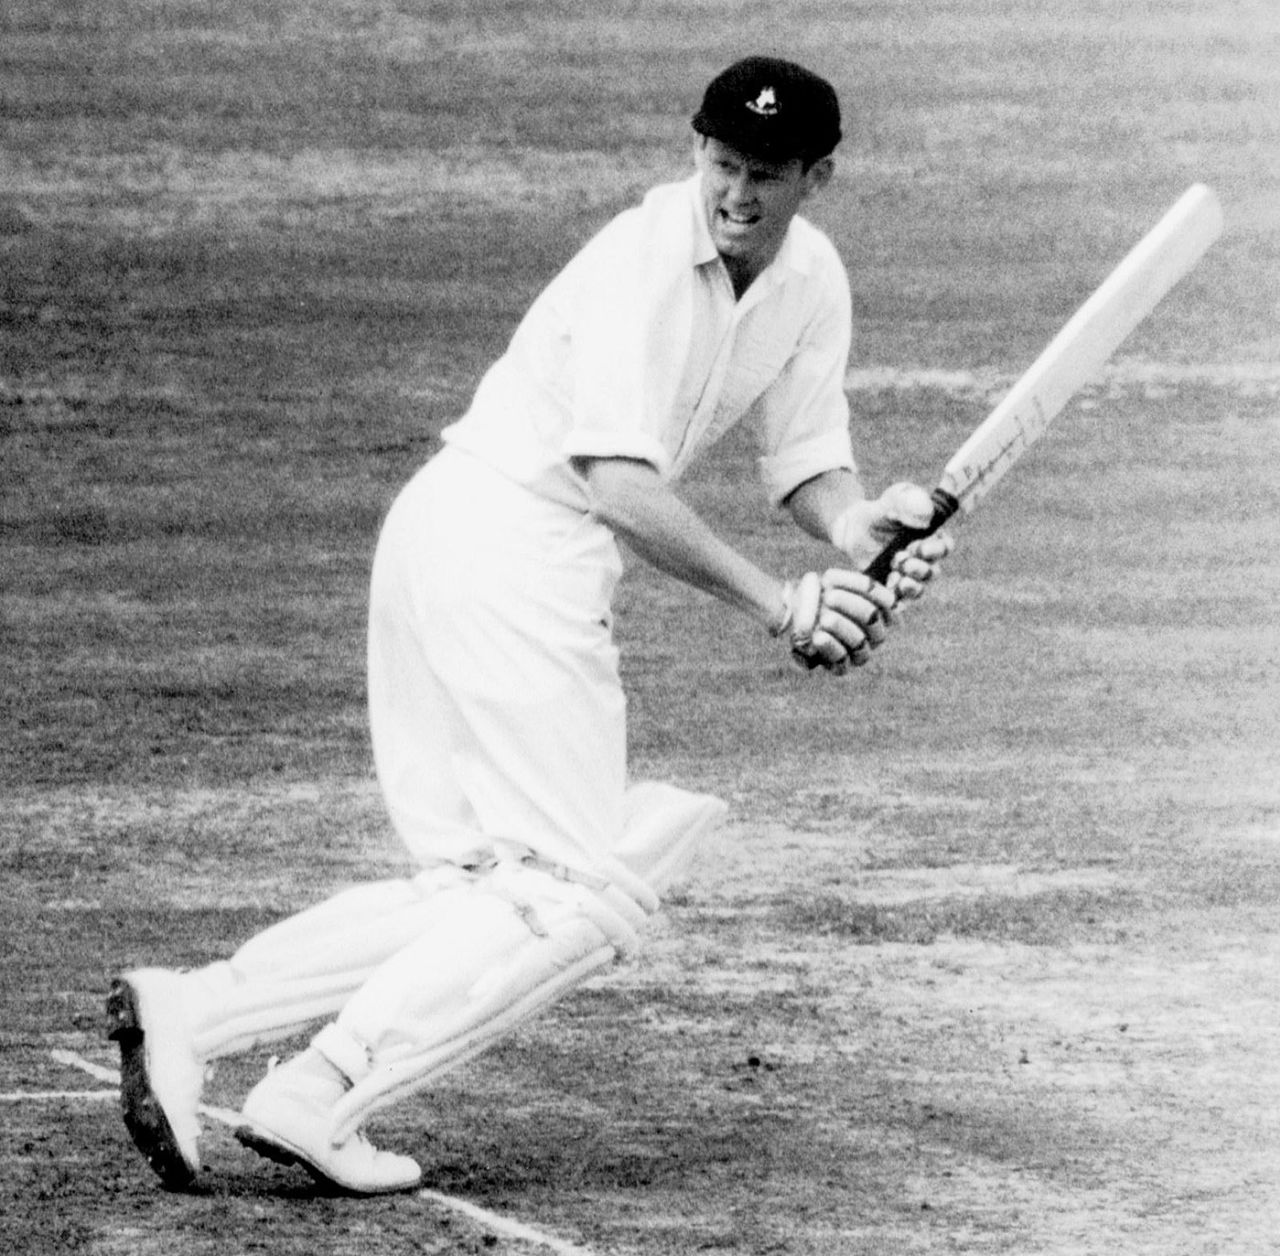 Graeme Pollock bats, England v South Africa, 1st Test, Lord's, 1st day, July 22, 1965